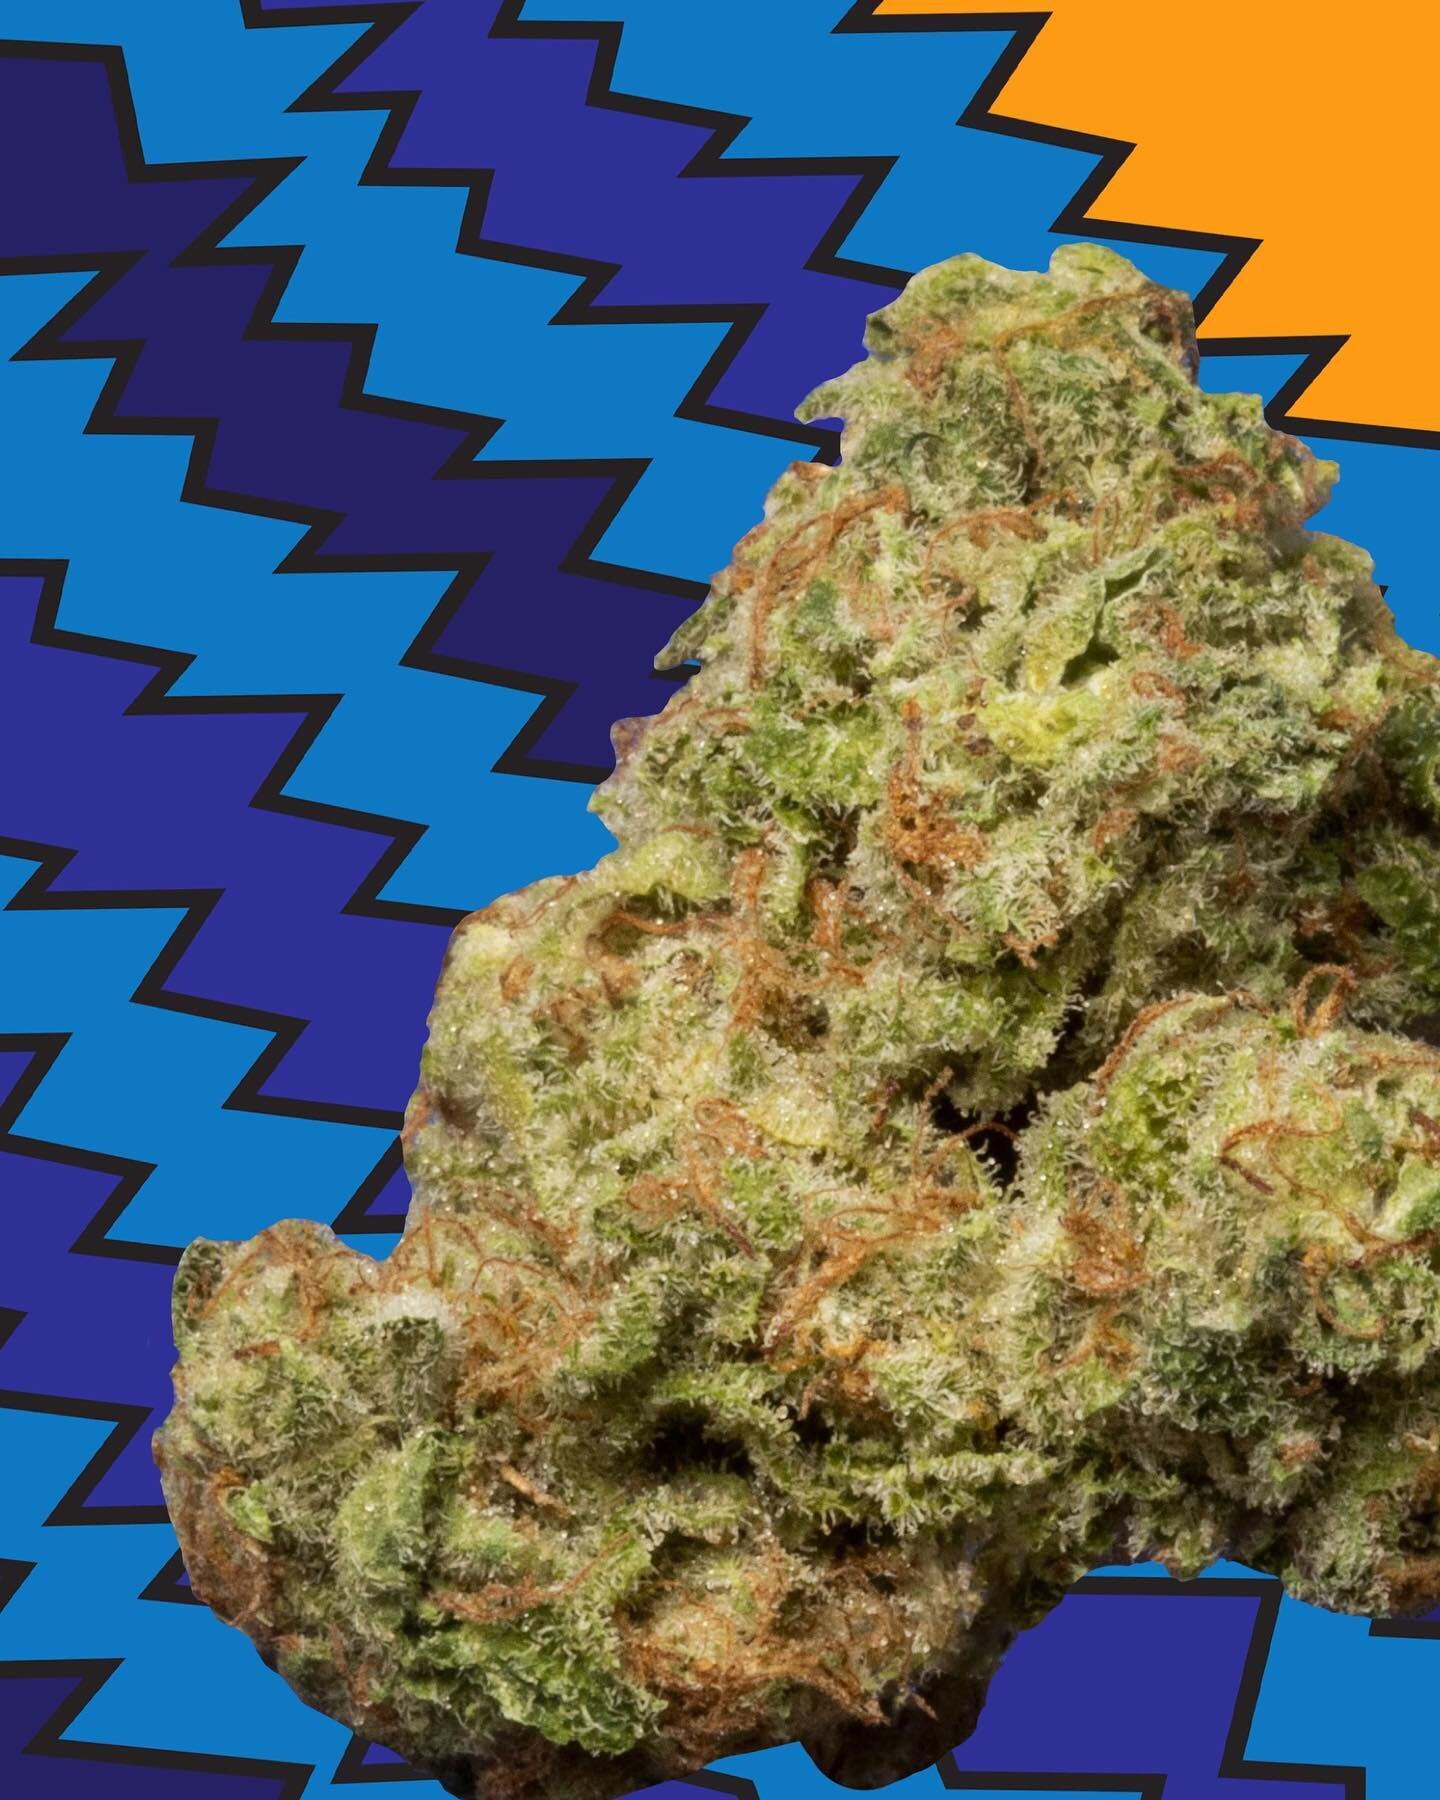 Starting the week off right with our New Limited Edition Strain&hellip;⚡️GRATICA!⚡️

Meaning &ldquo;Grate&rdquo;ful in Italian, this strain pays homage to the legendary jam band&hellip; The Grateful Dead! 🌟